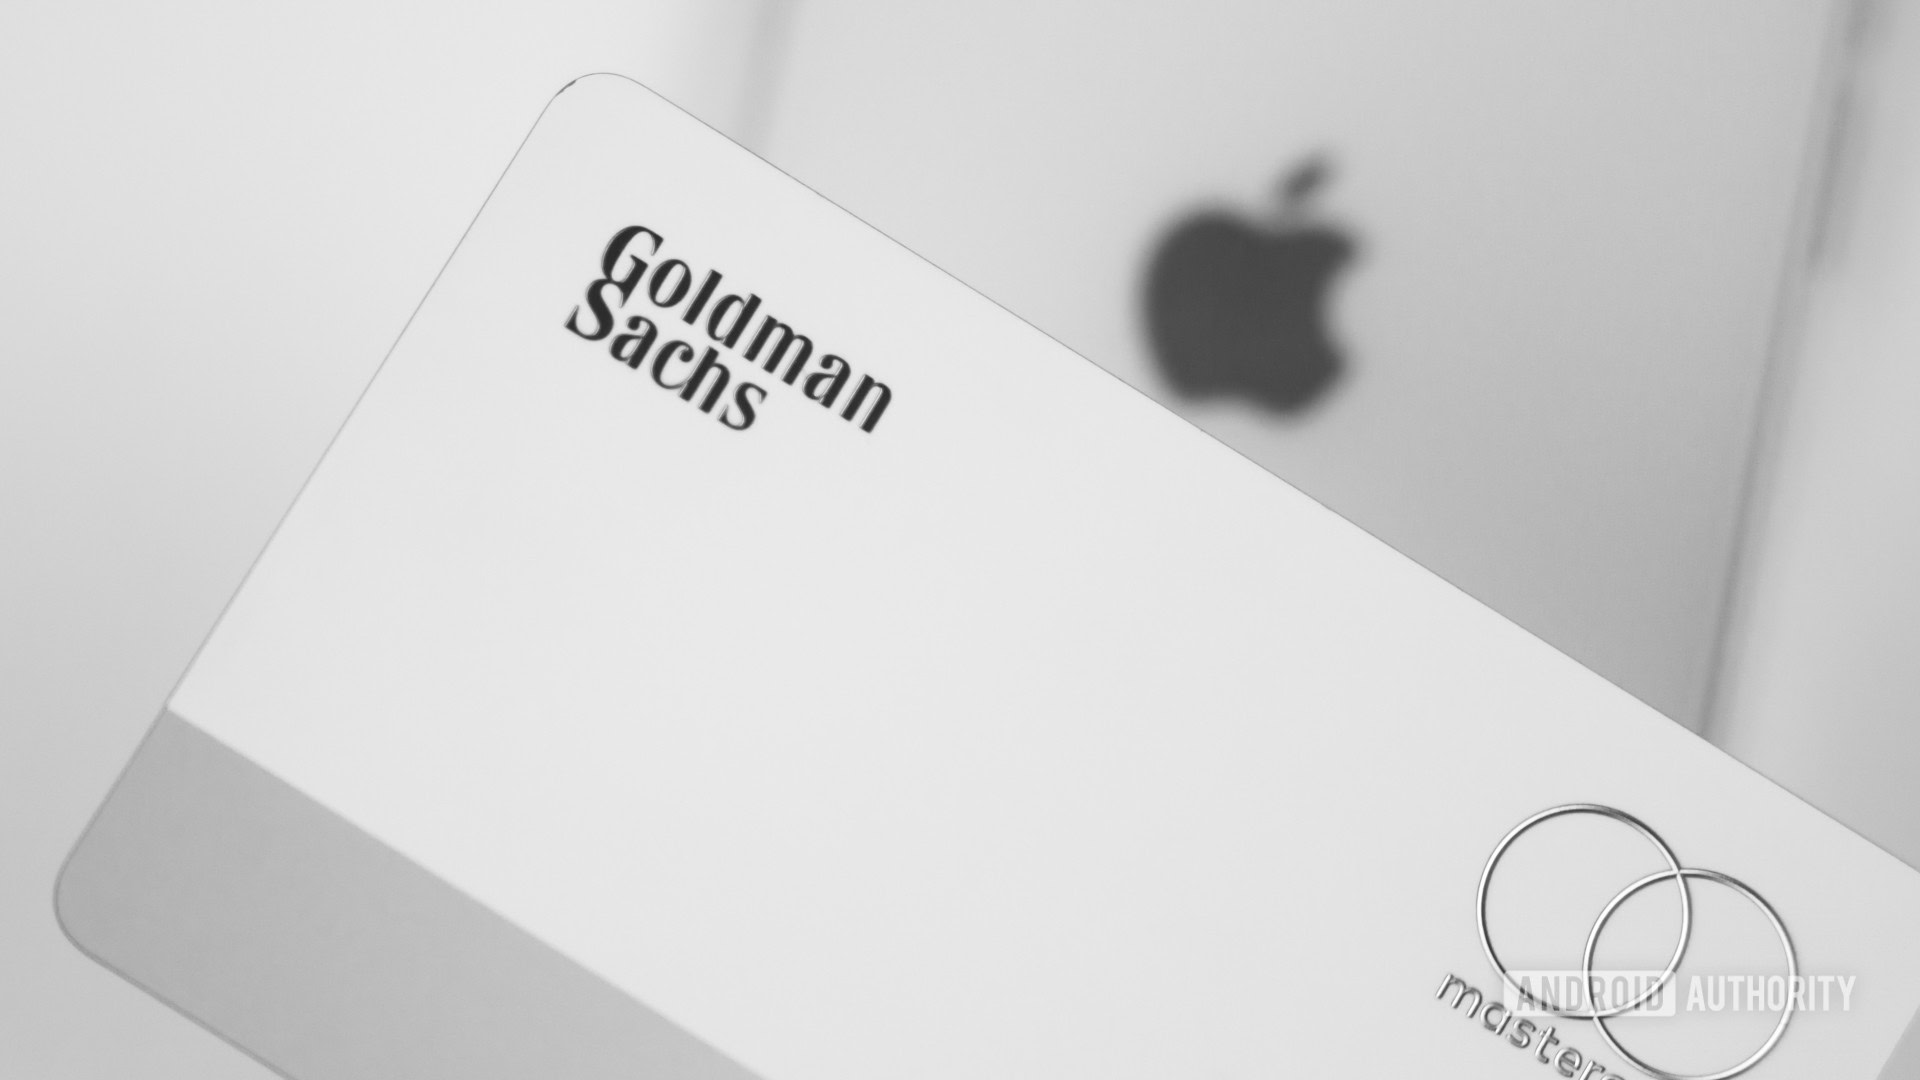 https://www.androidauthority.com/wp-content/uploads/2023/04/Golfman-Sachs-next-to-Apple-smartphone-showing-logo-Stock-Photo.jpg